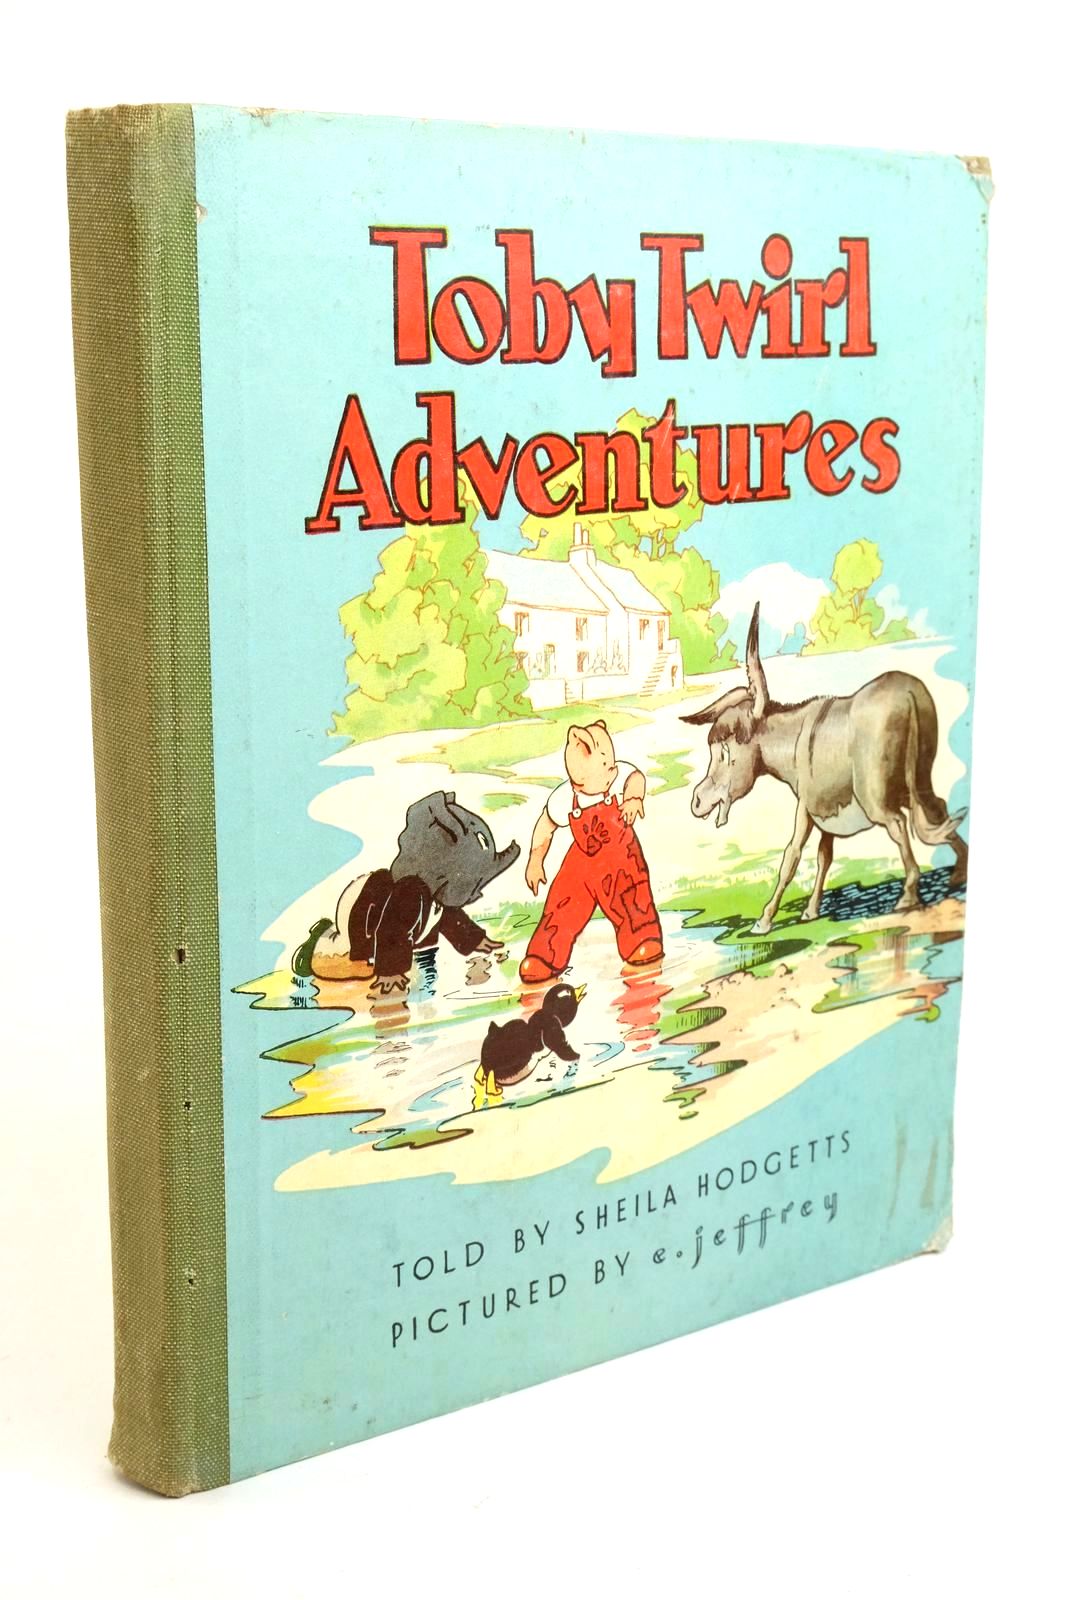 Photo of TOBY TWIRL ADVENTURES written by Hodgetts, Sheila illustrated by Jeffrey, E. published by Sampson Low, Marston &amp; Co. Ltd. (STOCK CODE: 1322172)  for sale by Stella & Rose's Books